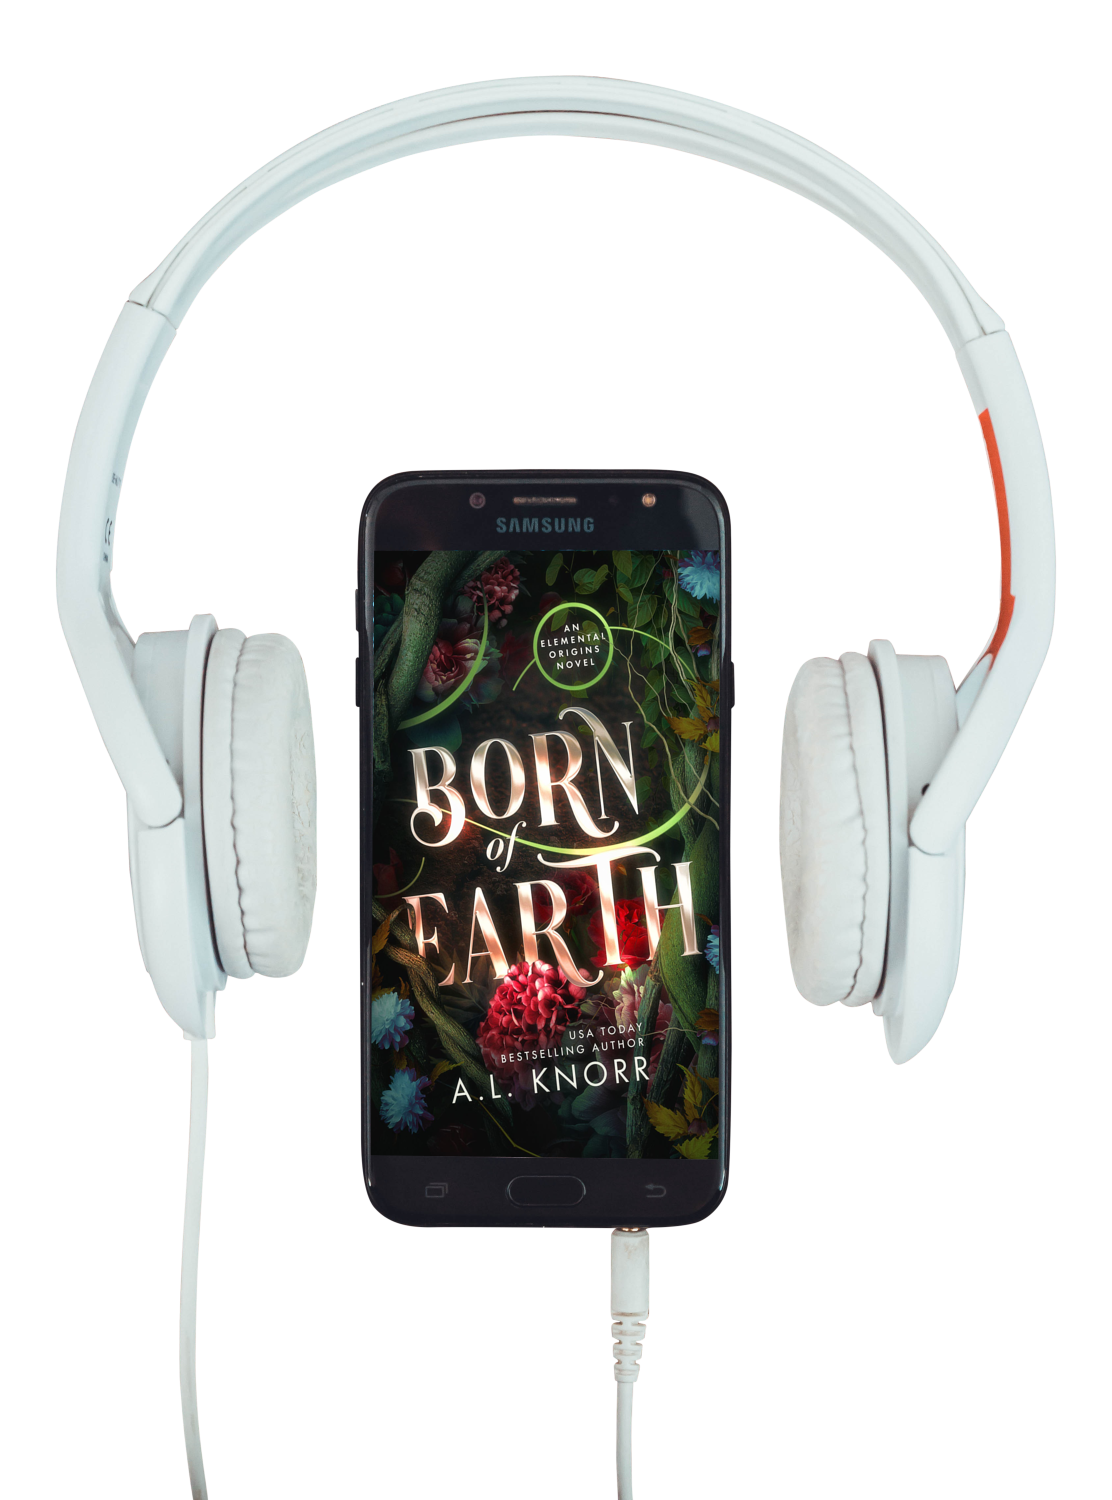 Born of Earth audiobook graphic with headphones